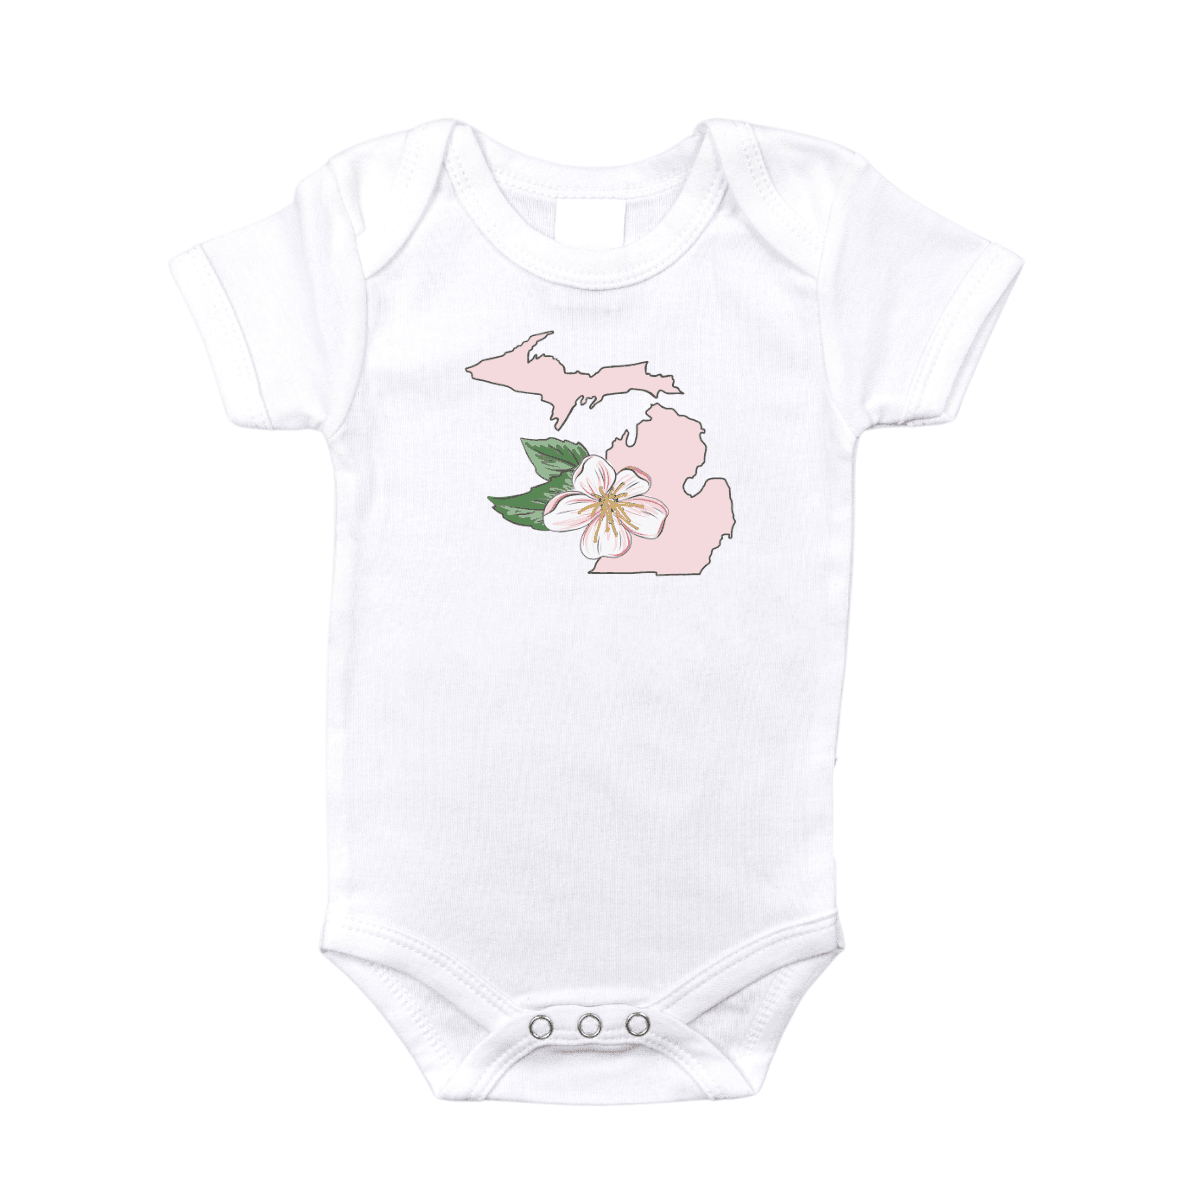 White baby onesie with "Michigan Apple Blossom" text and a pink apple blossom graphic on the front.